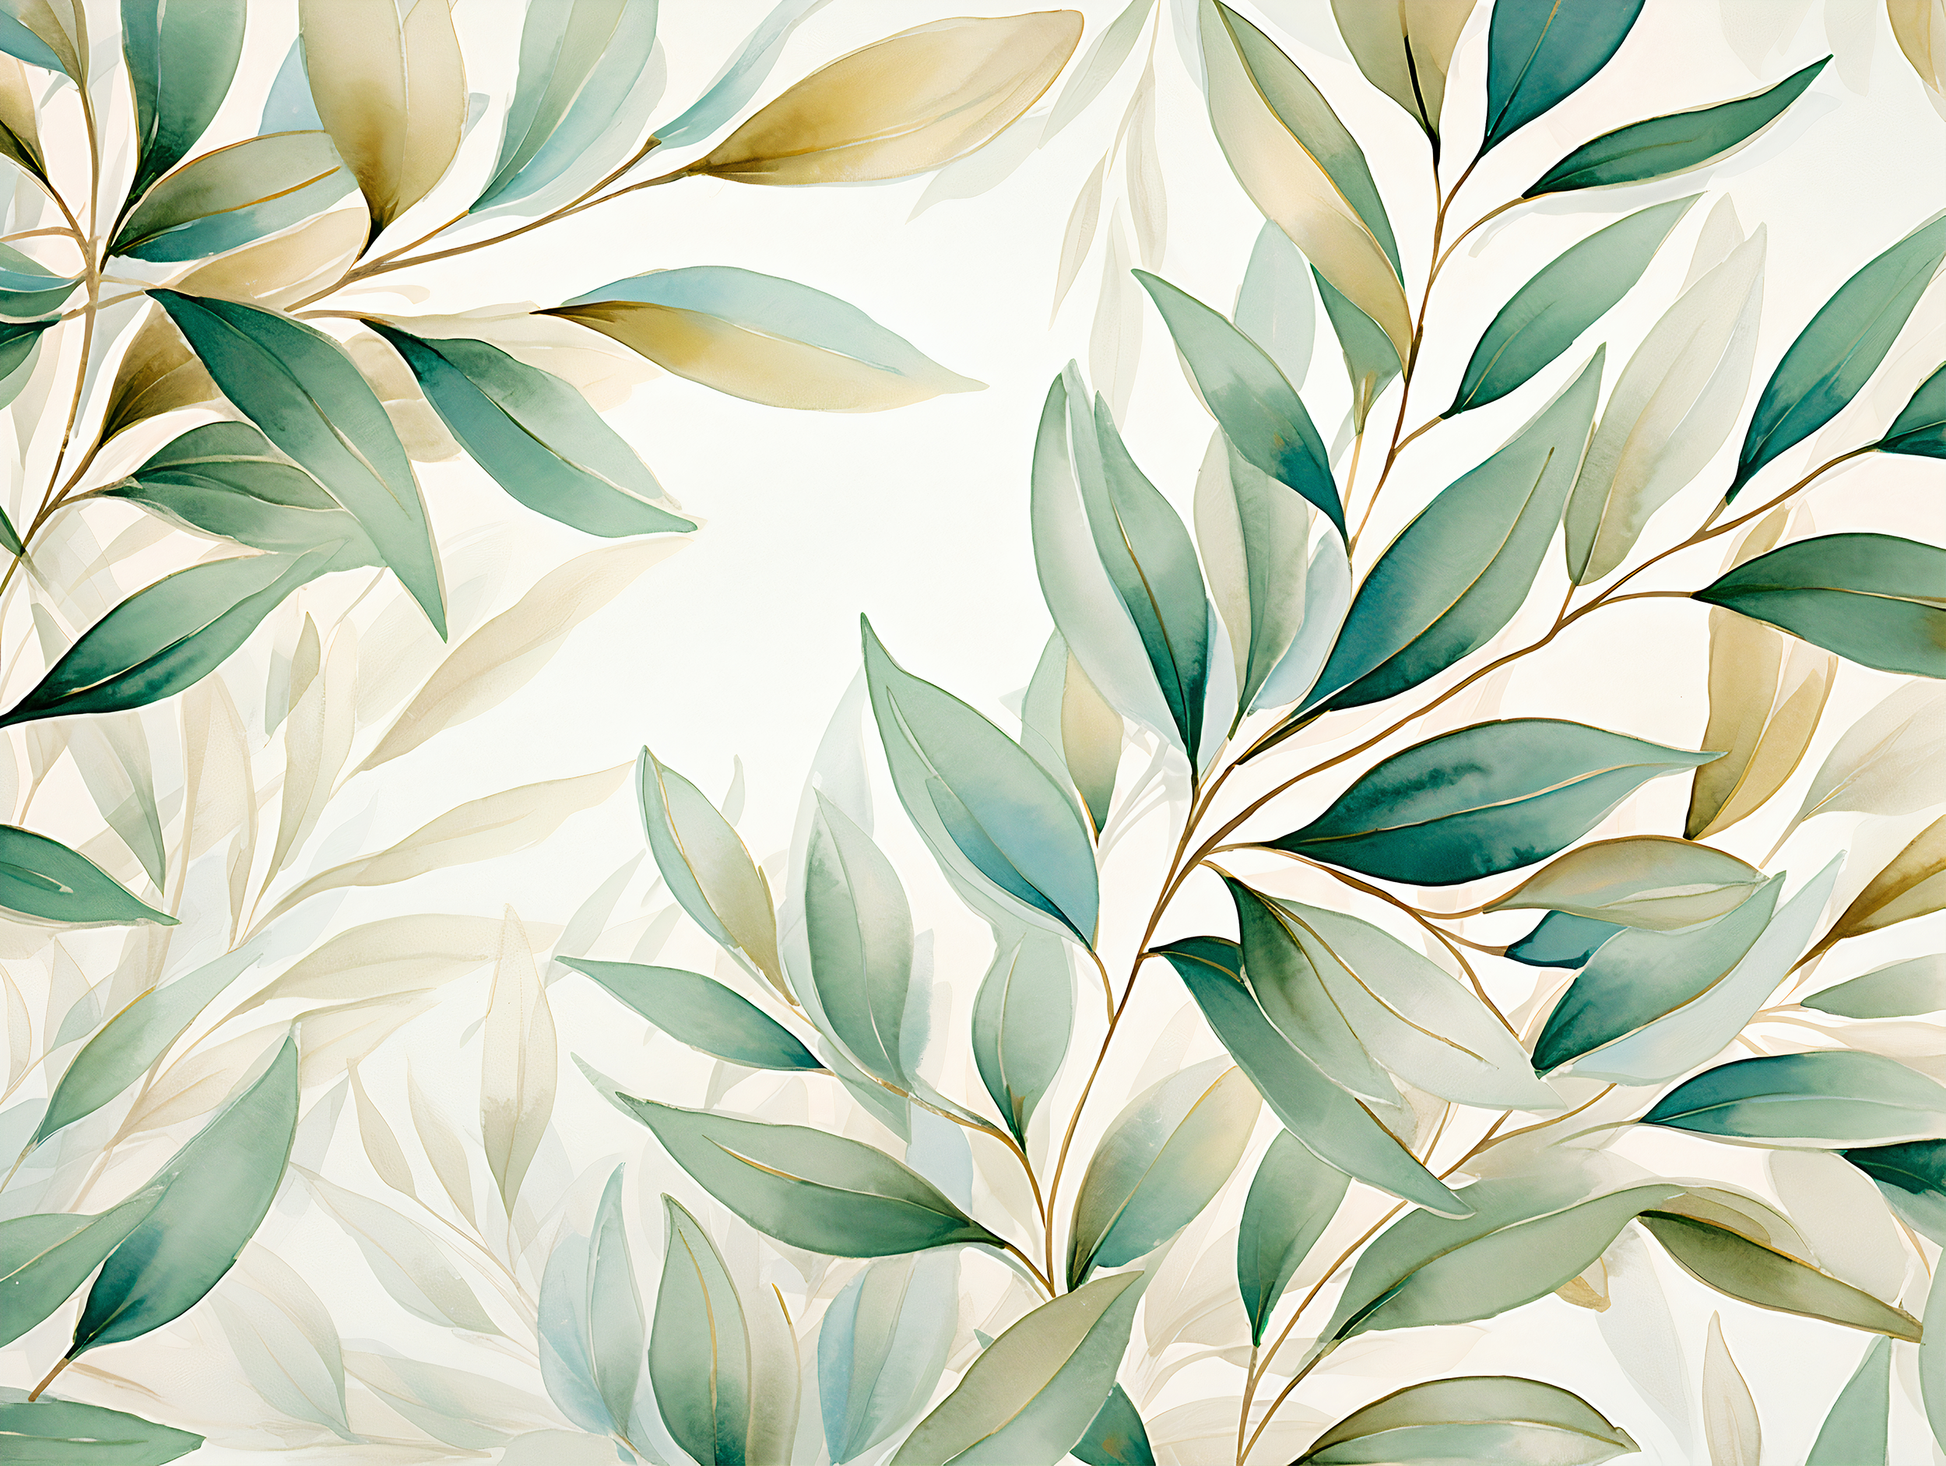 Minimalist Leaves Mural for Home Decor